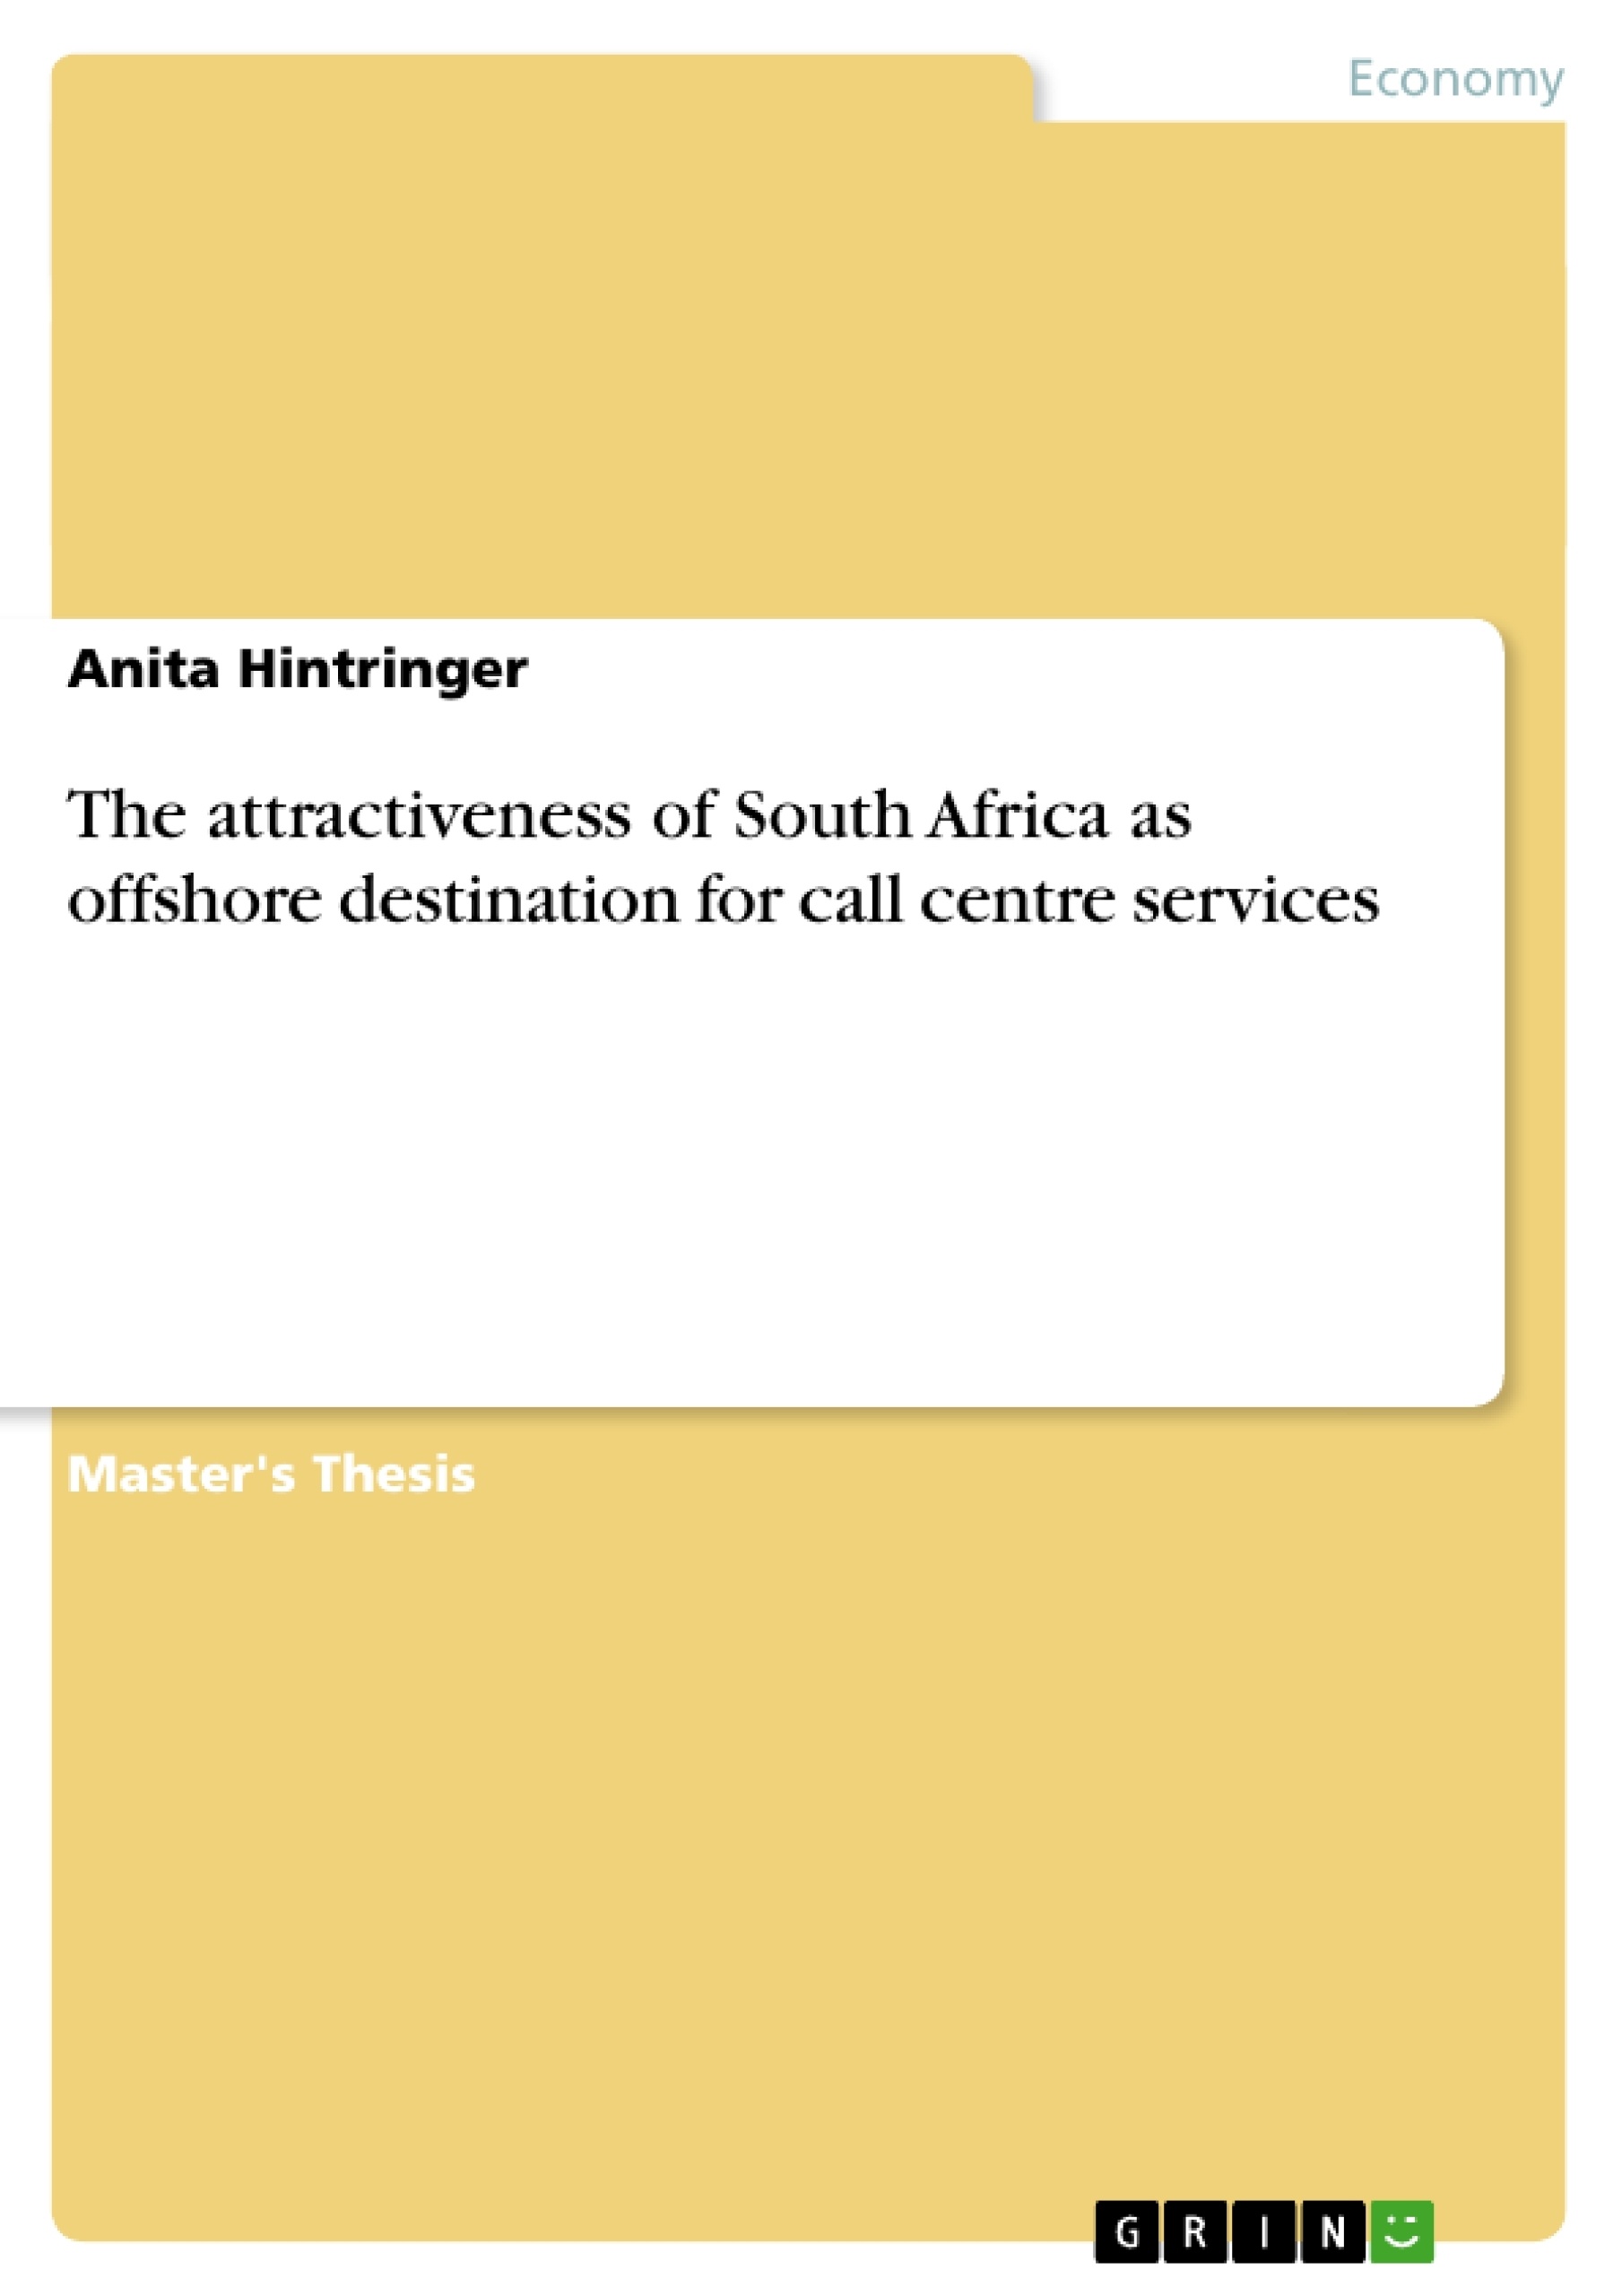 Title: The attractiveness of South Africa as offshore destination for call centre services